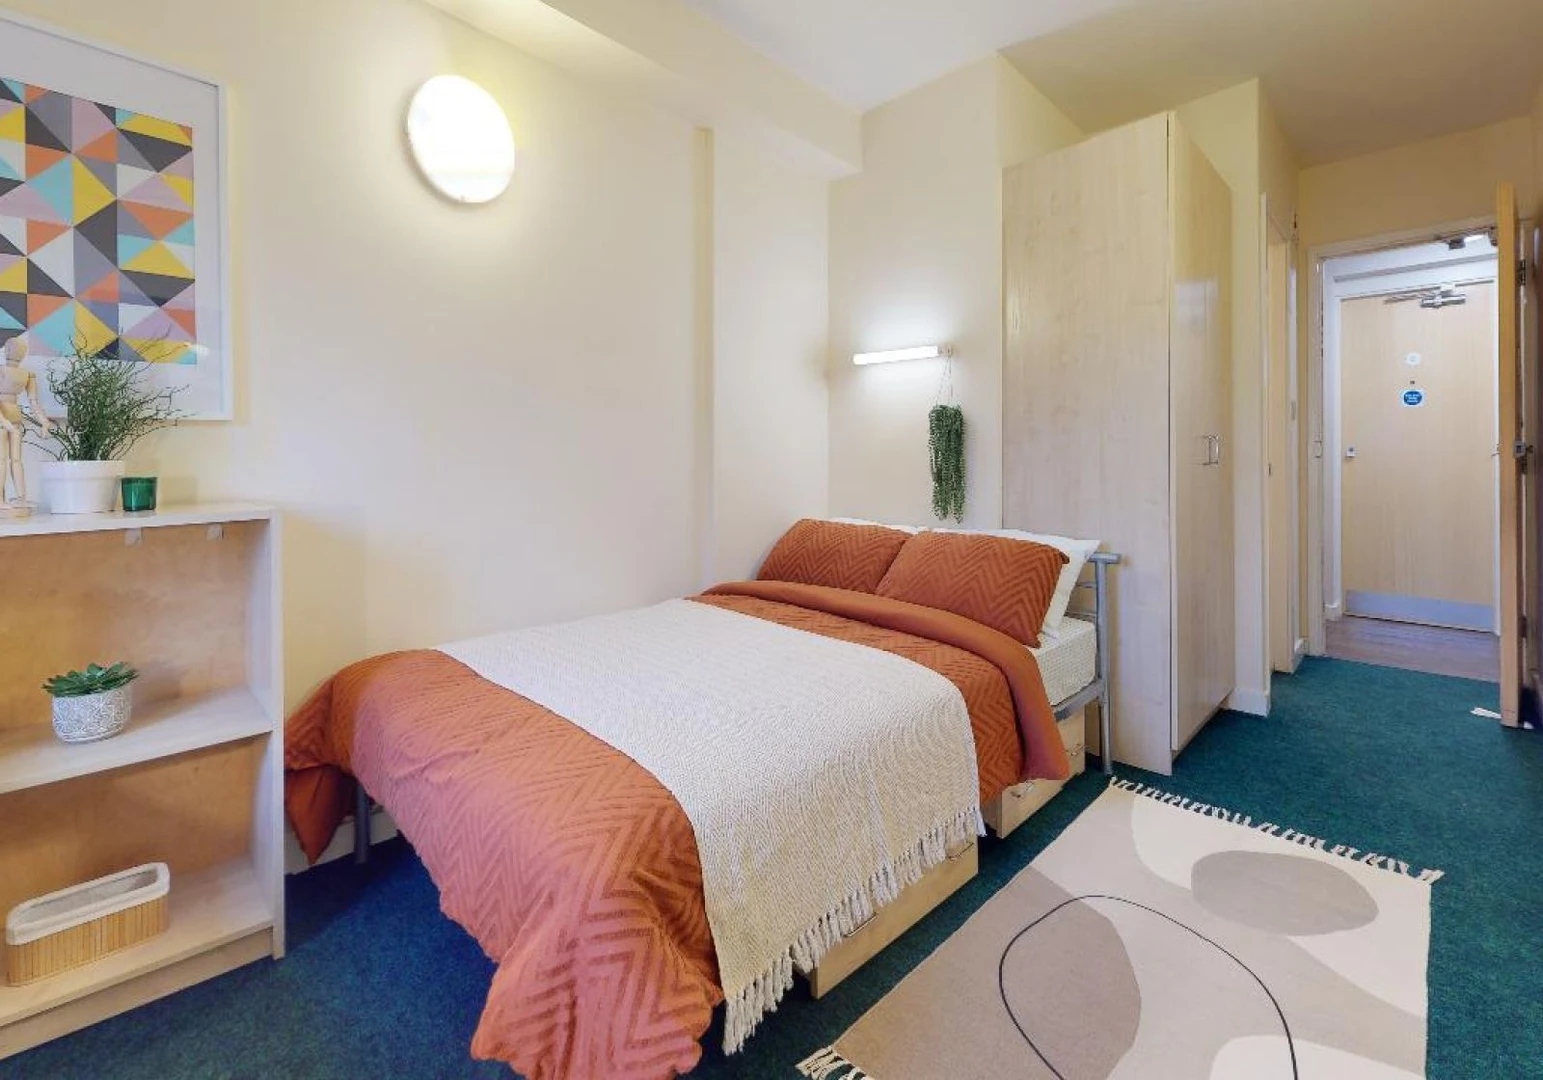 Cheap private room in Huddersfield